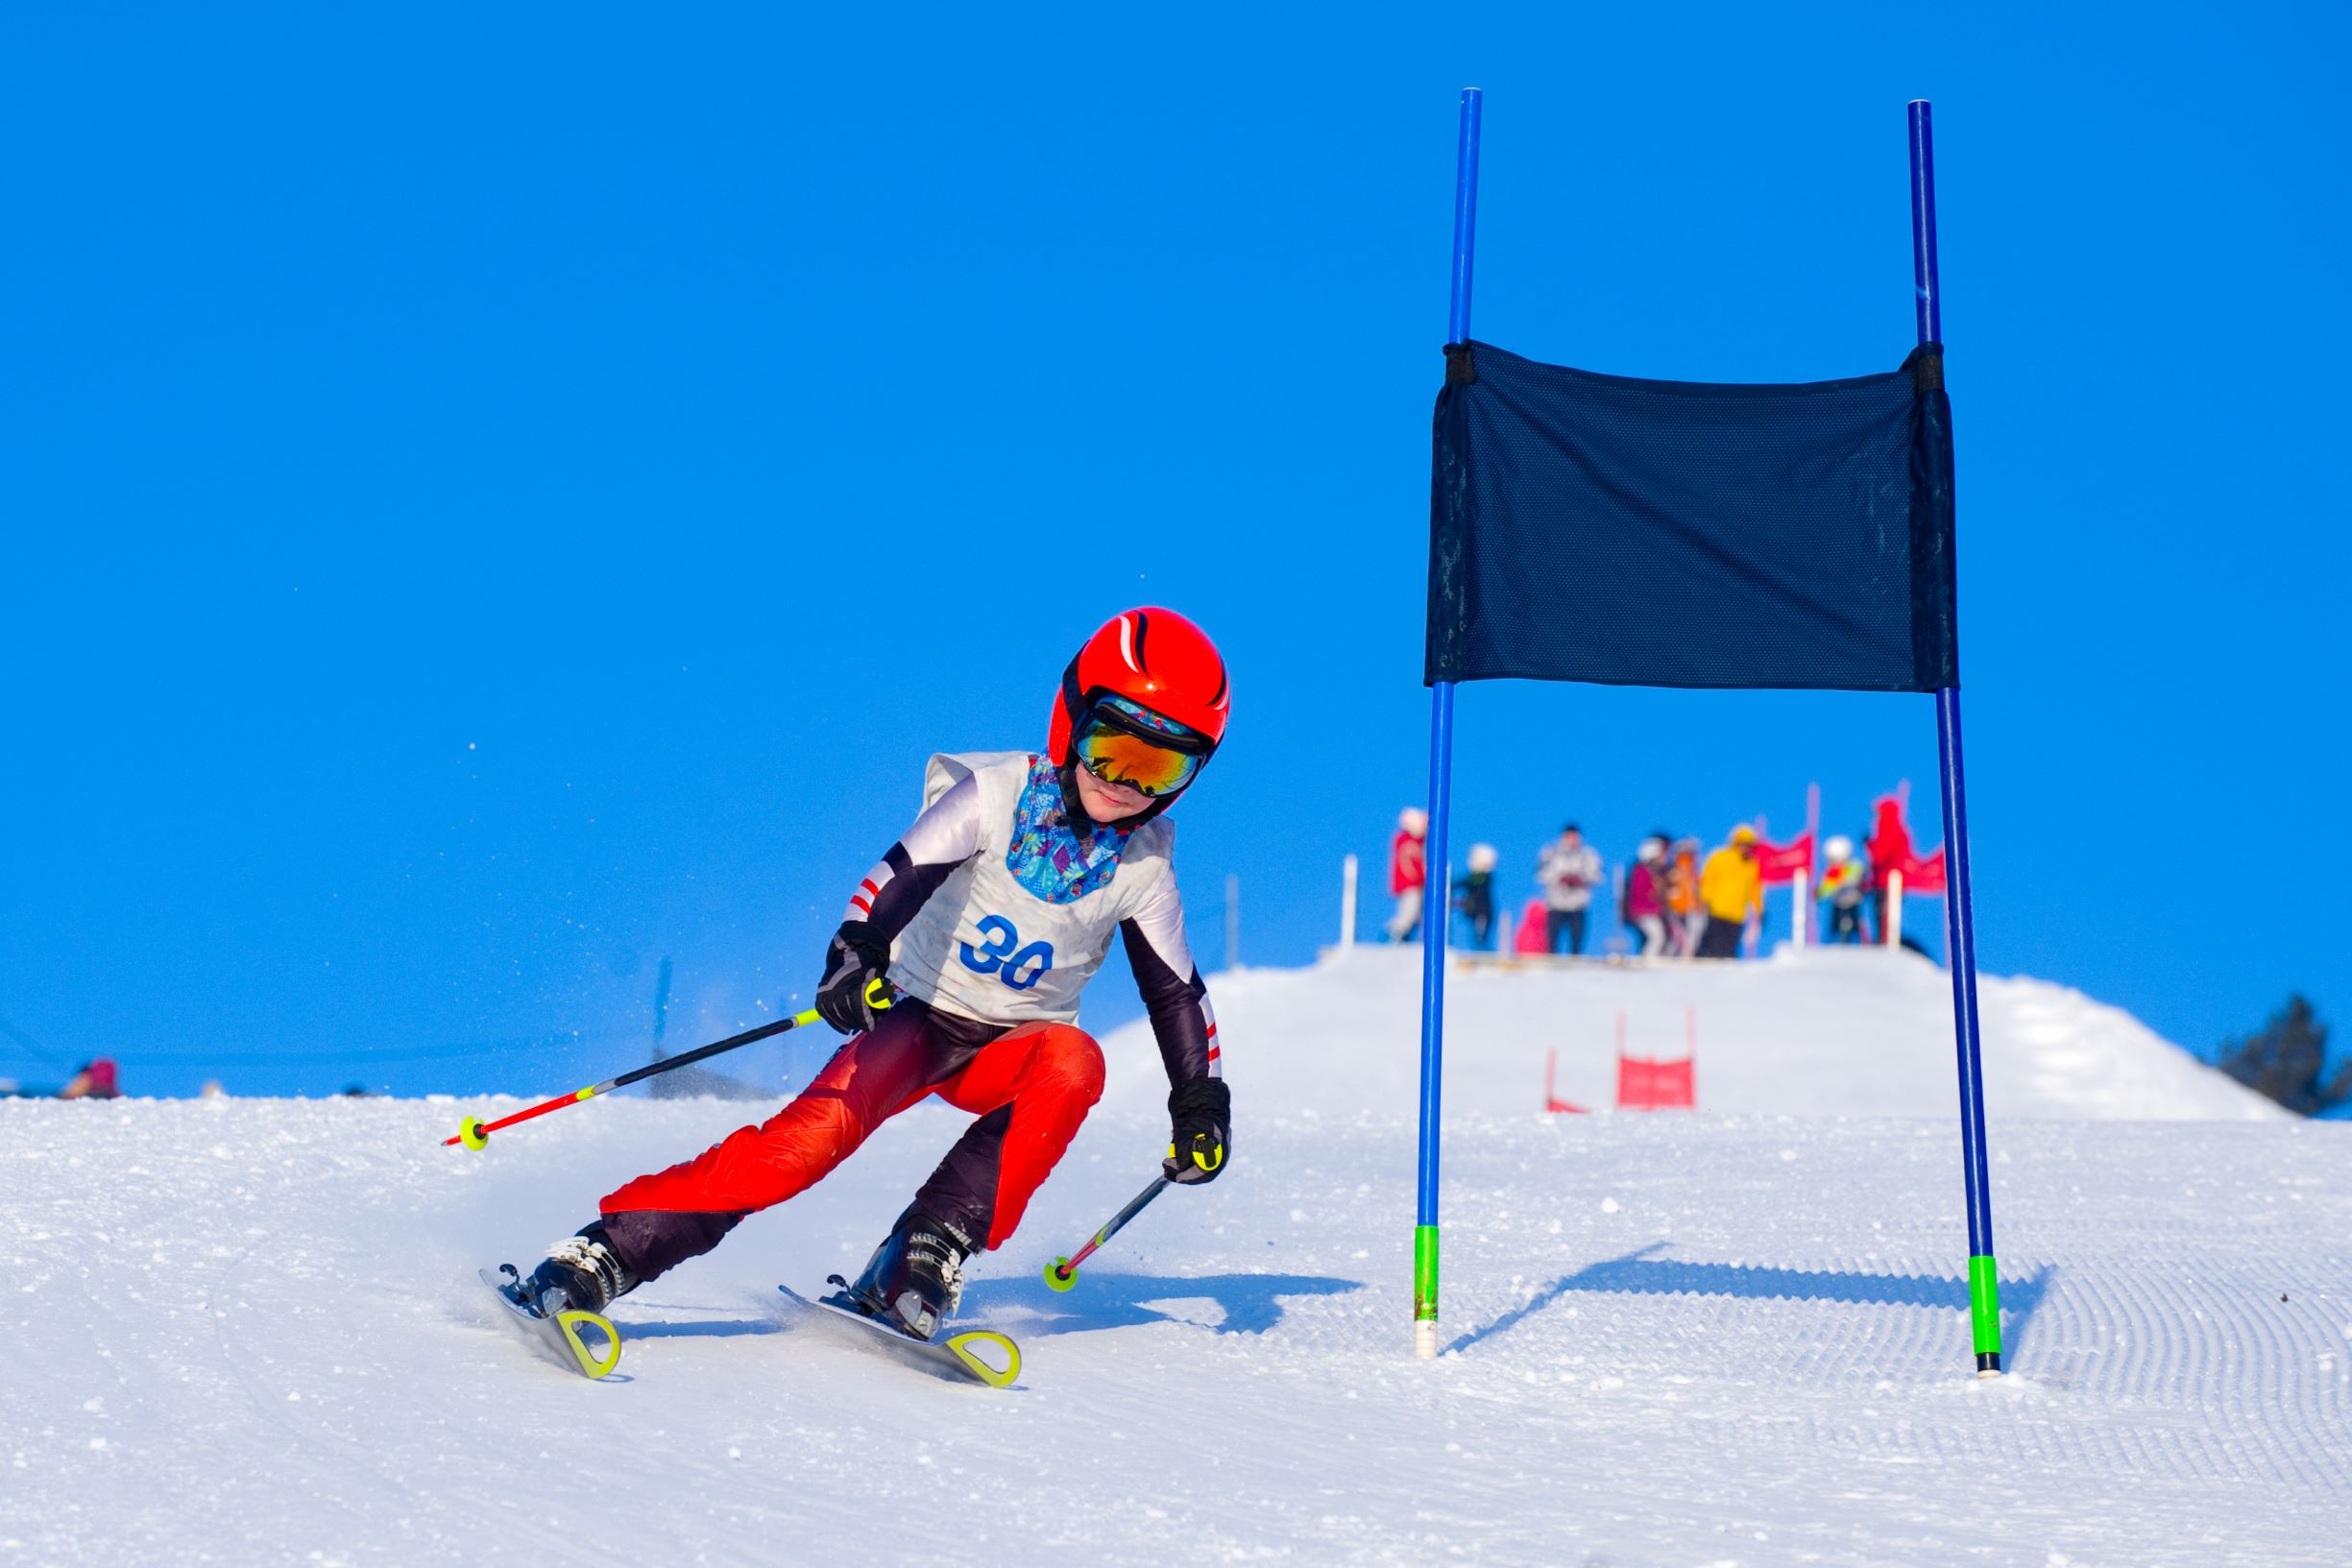 Young alpine skier descending a slope during a competition.